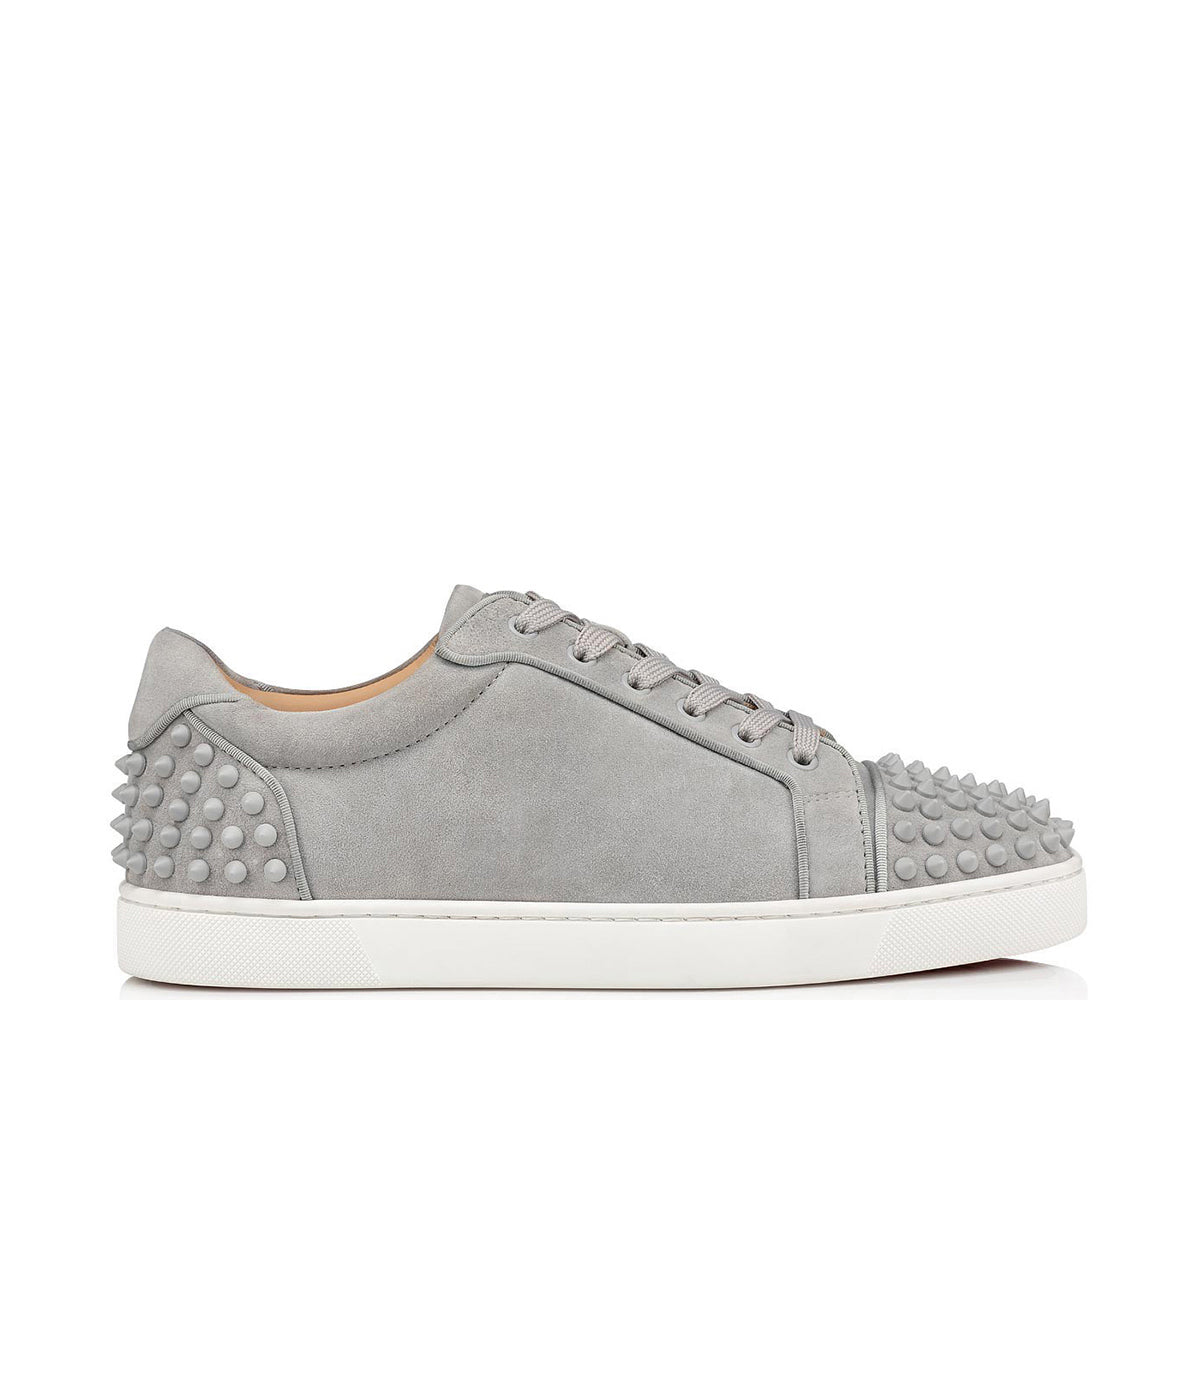 Christian Louboutin Spikes Sneakers